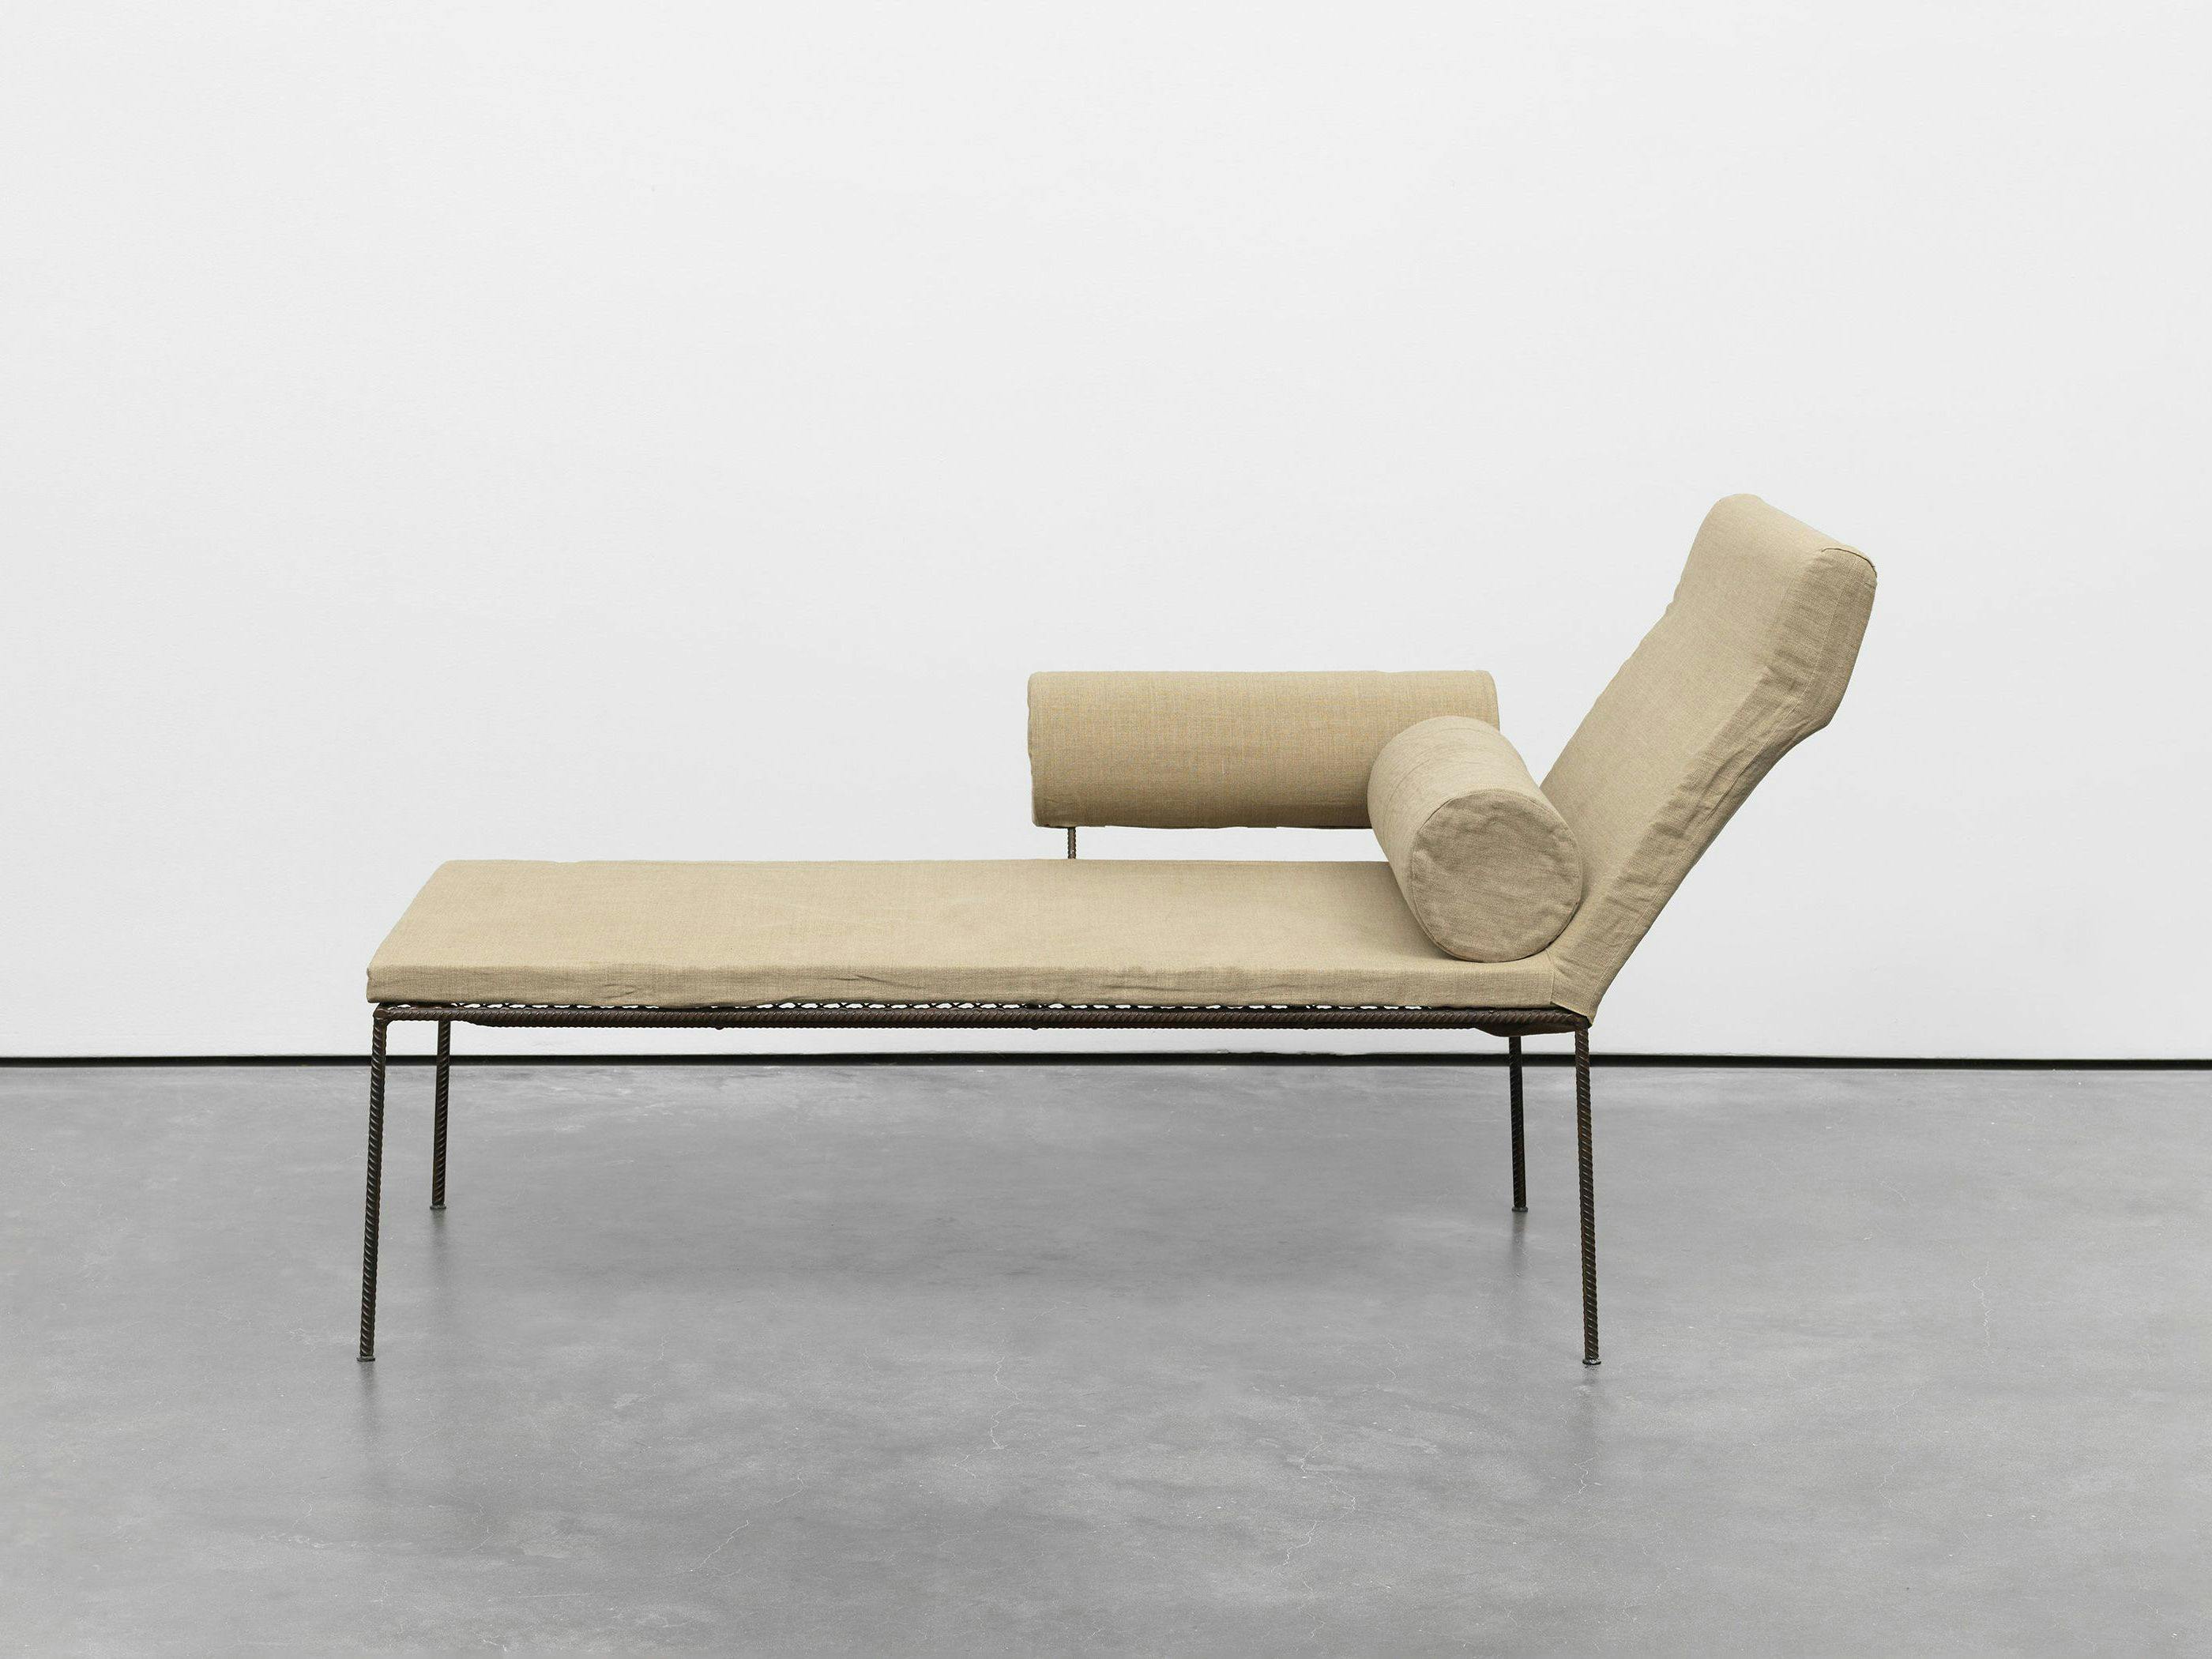 A furniture work by Franz West, titled Chaiselongue (Chaise Longue), dated in 1992 and 2015.